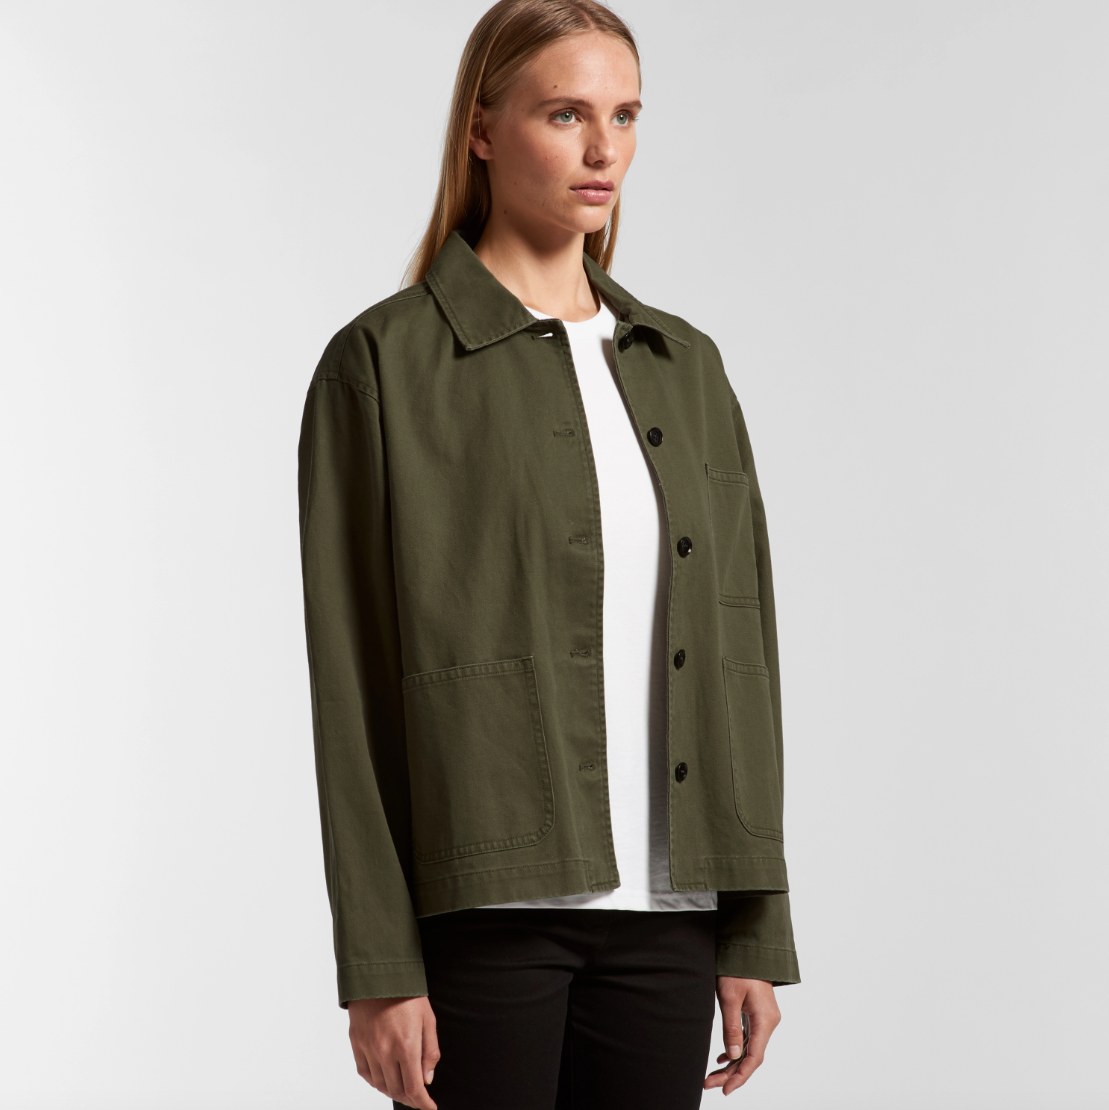 Women's Chore Jacket | Branded Jackets | AS Colour Jackets